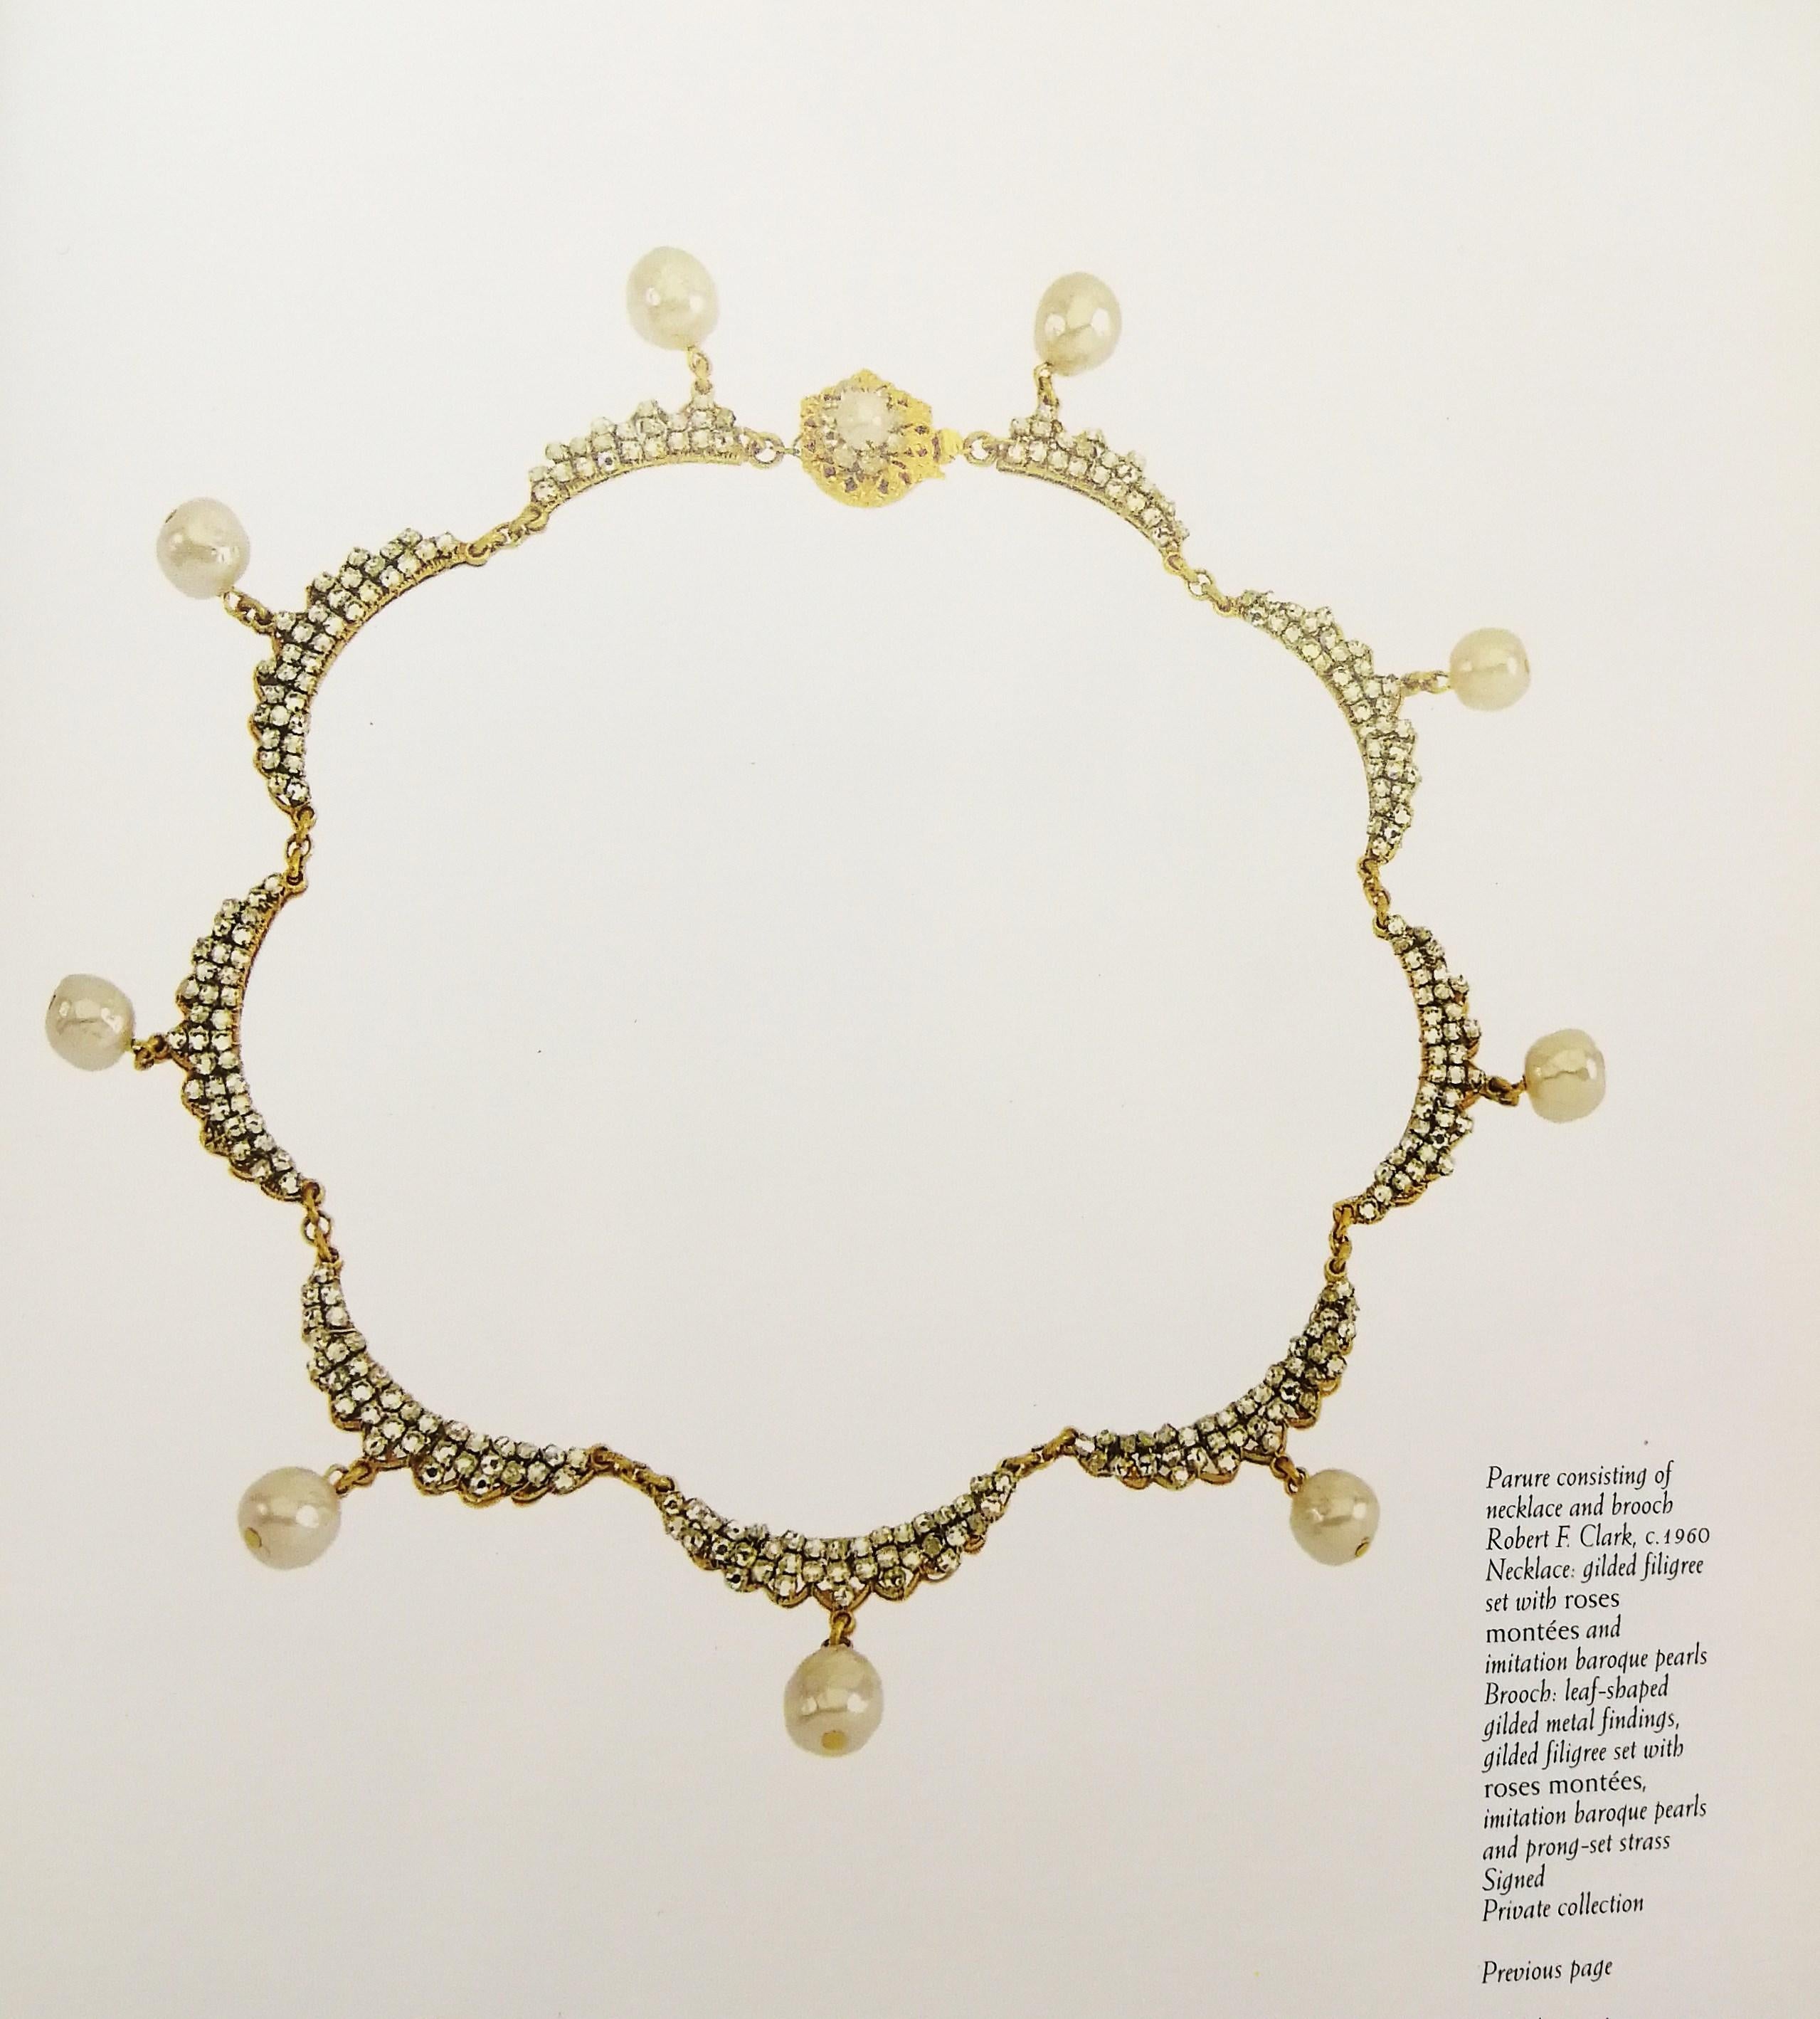 A necklace and earrings of gilded metal, paste and baroque pearl, Miriam Haskell 10